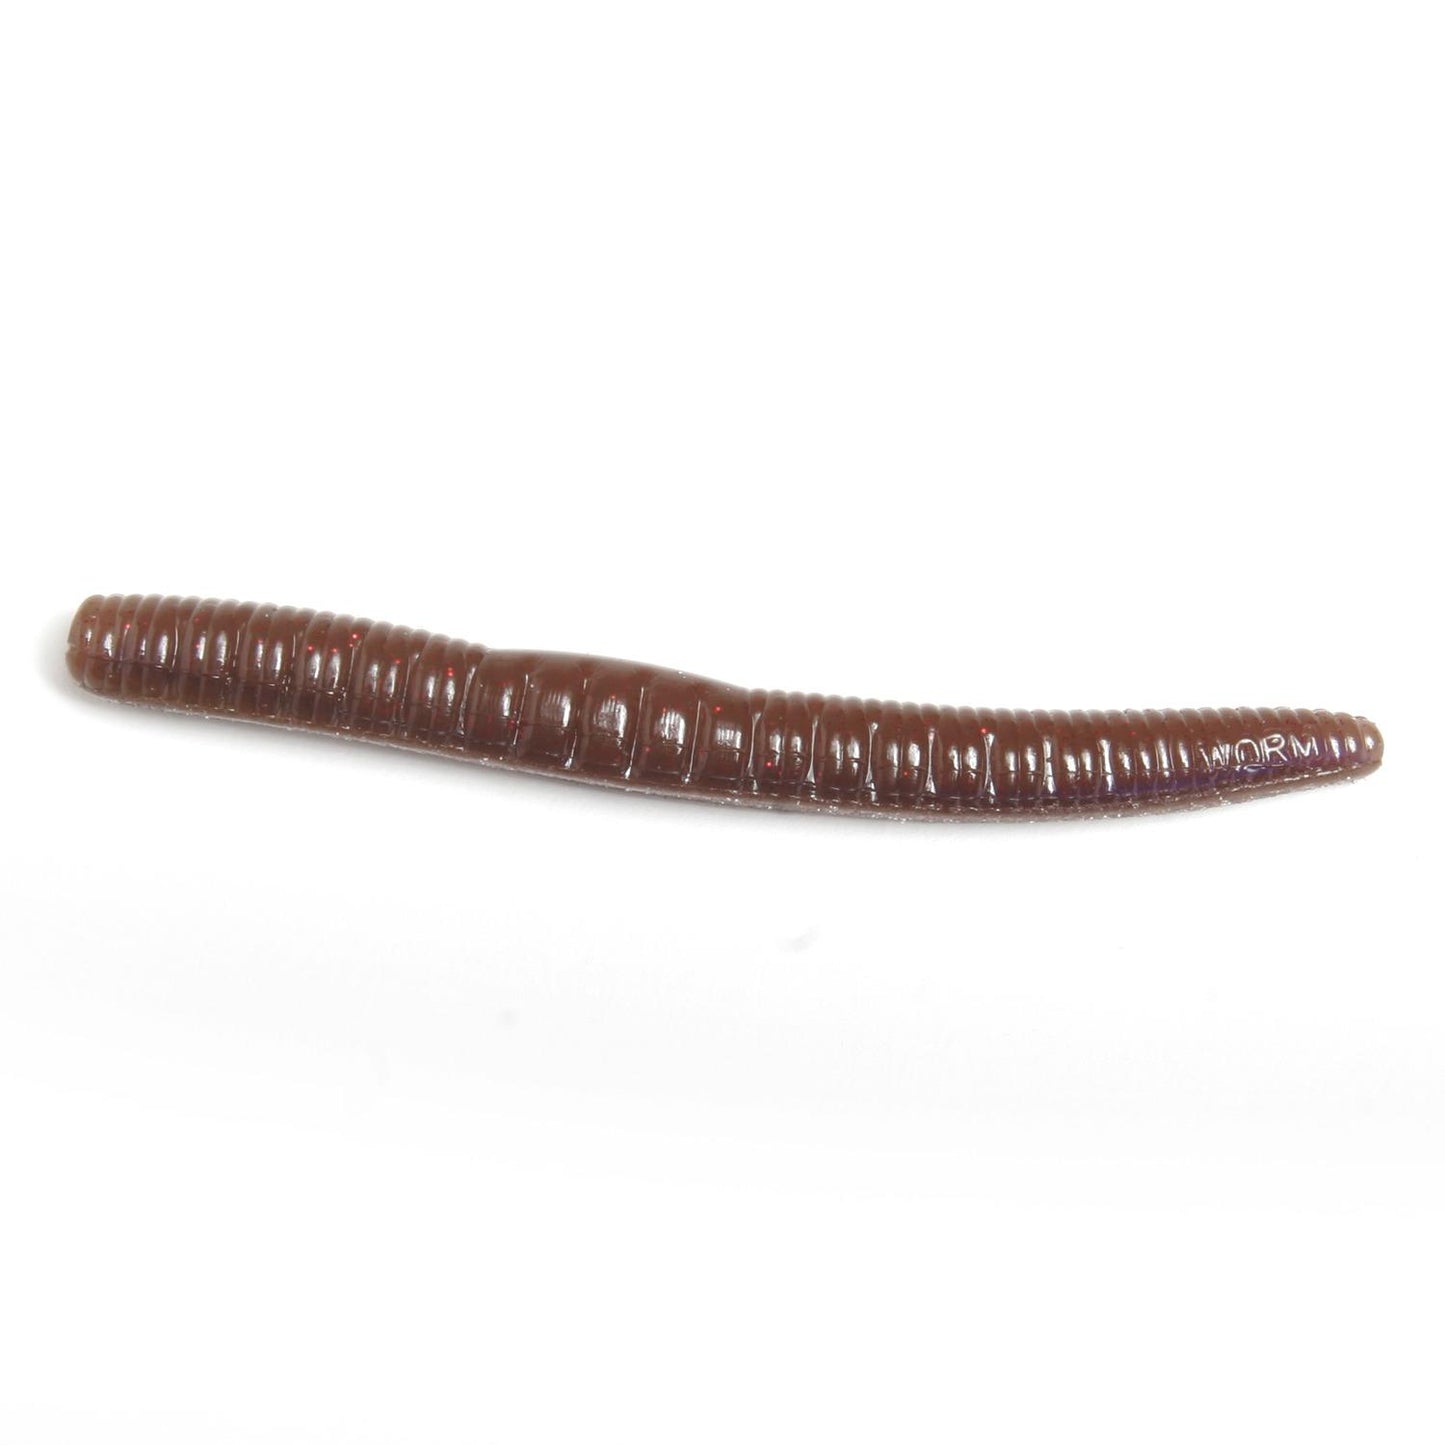 Roboworm N5-A2AR Ned Worm 5" Oxblood Light Red Flake 6 Per Pack